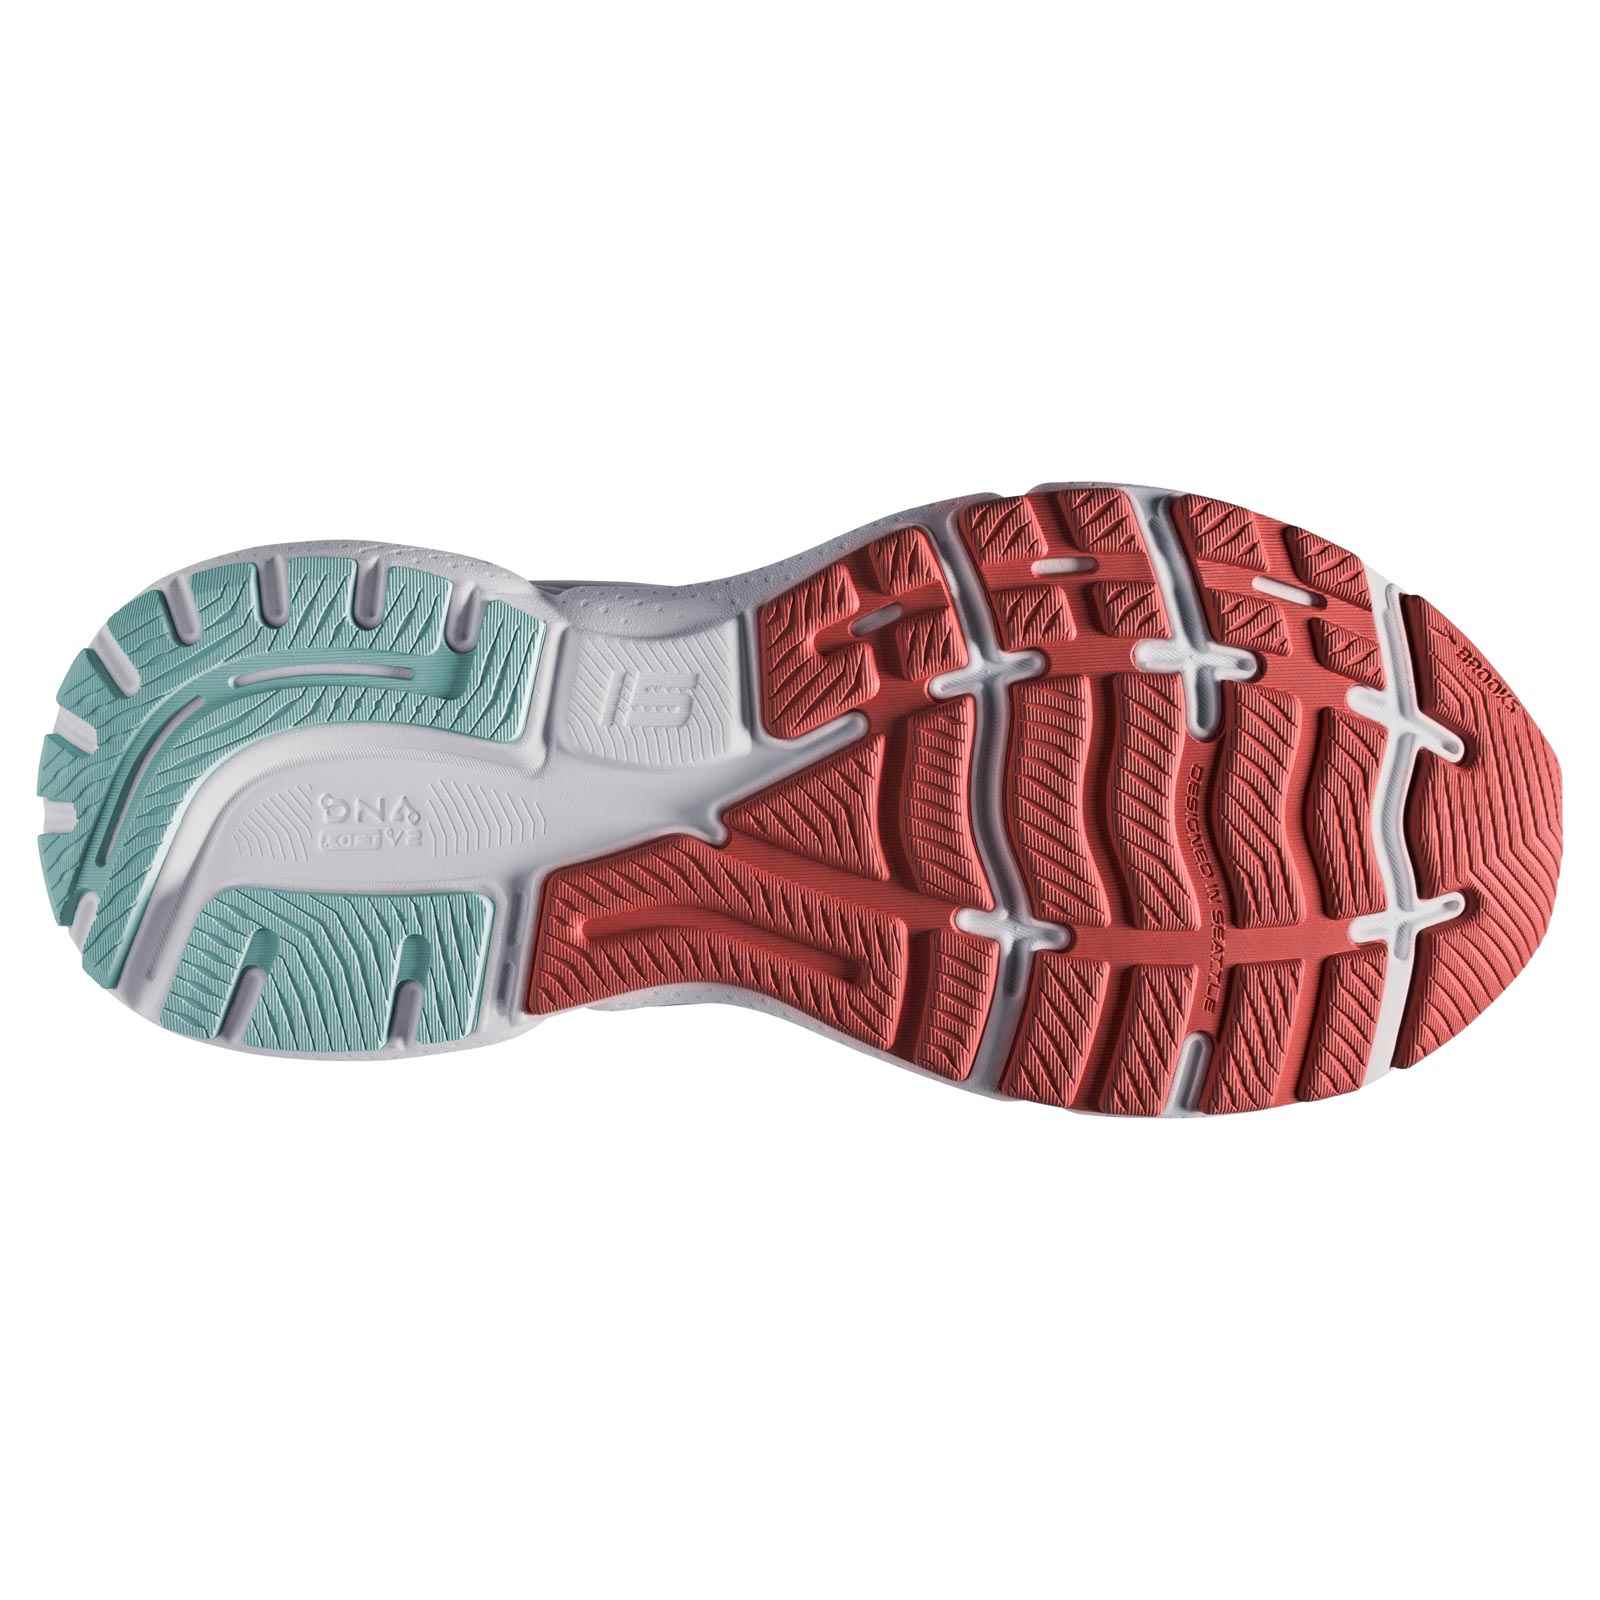 BROOKS GHOST 15 WOMENS RUNNING SHOES